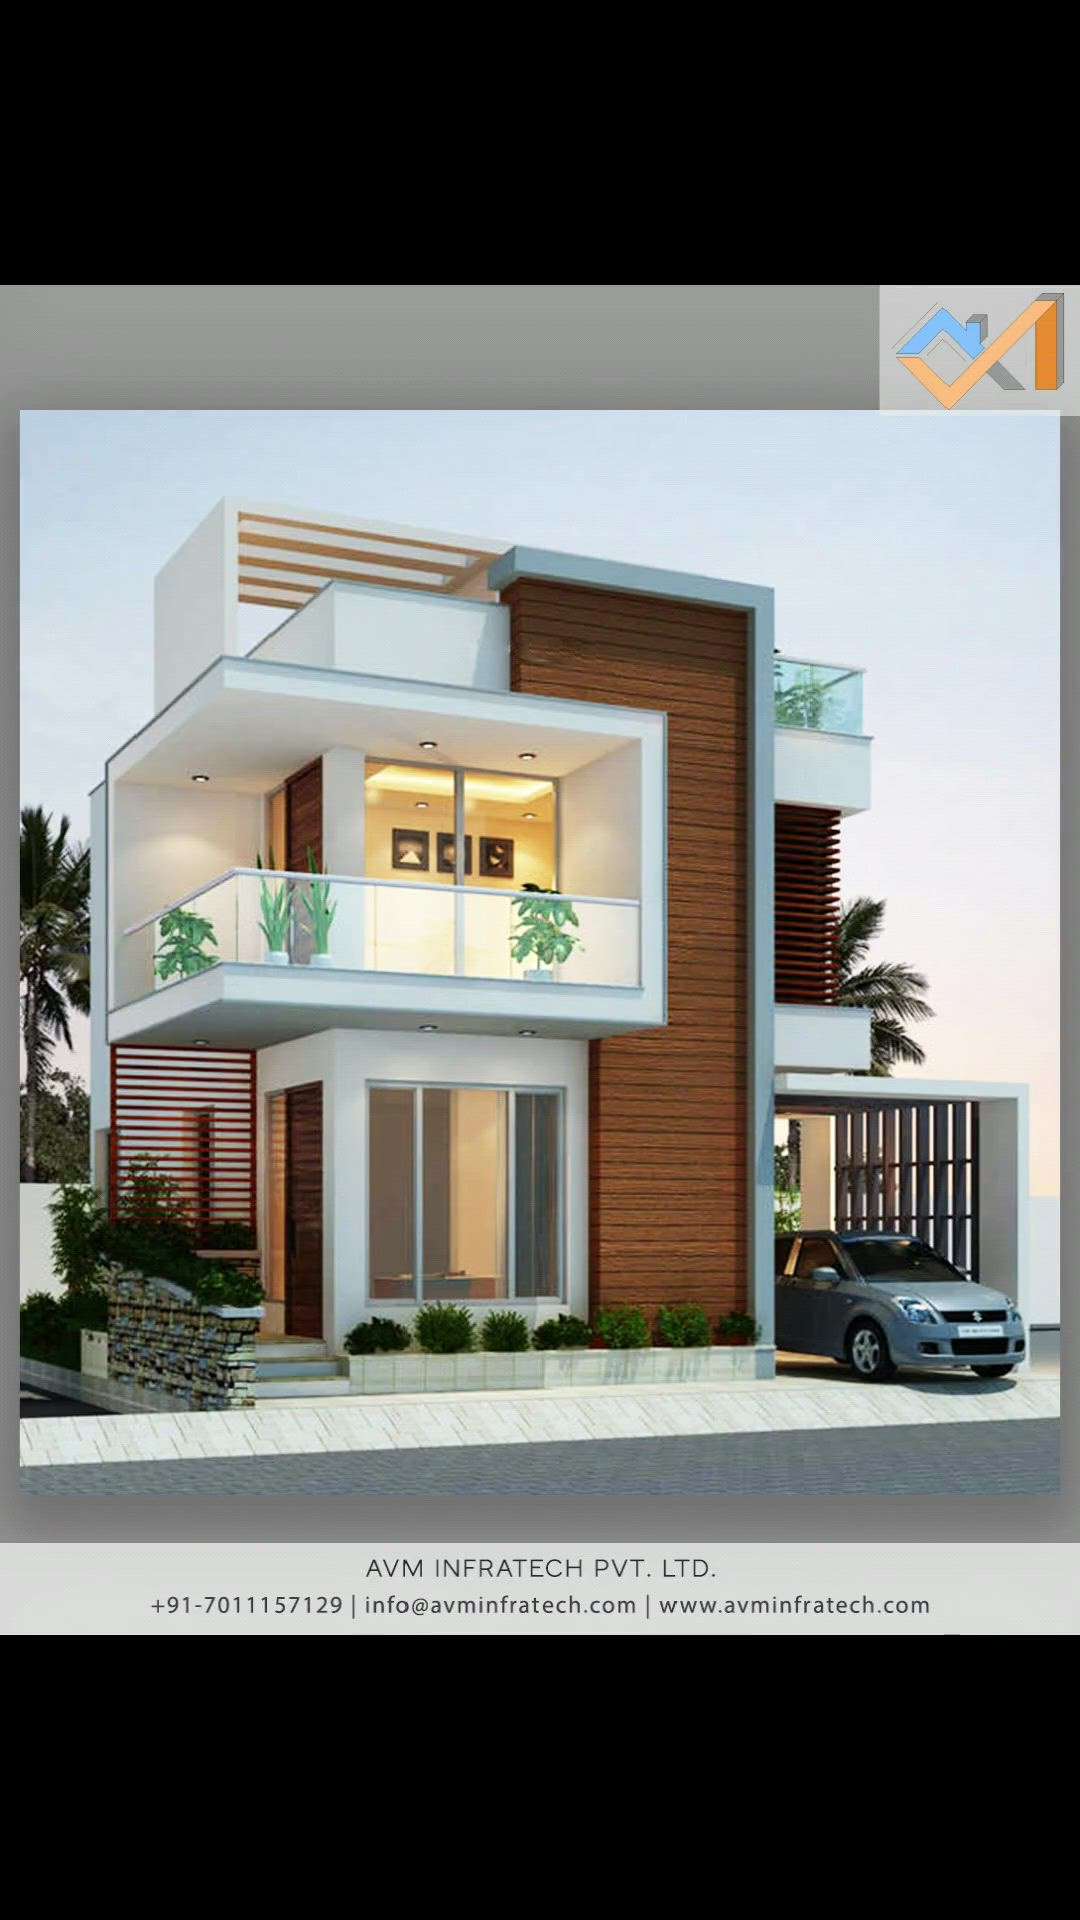 Small homes are more reasonable and less demanding to construct, clean, and keep up. These Small house designs might be littler in measure yet have floor area which can serve all your essentials.


Follow us for more such amazing updates.
.
.
#small #house #housedesign #houseparty #houseplants #housewife #housebeautiful #houseplan #housegoals #househunting #housedecoration #home #homedecor #homedesign #homedecoration #homesweethome #homestyle #homemade #homeinterior #homeinspiration #smallhouse #smallhousedesign #smallhome #smallhomedesign #smallhomedecor #avminfratech